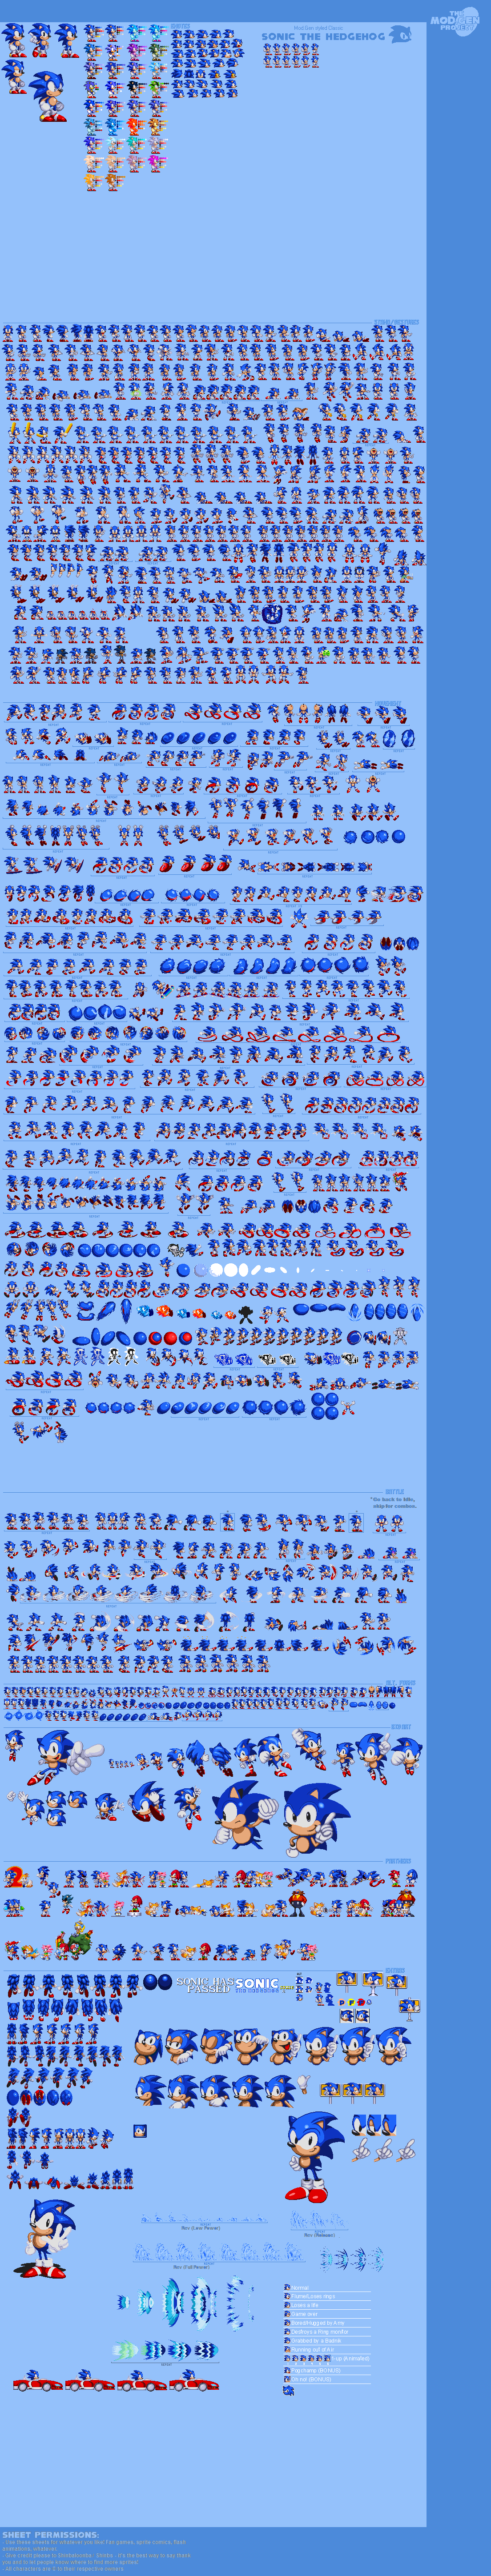 Sonic Before The Sequel Ats Sprite Sheet By Mekantheg